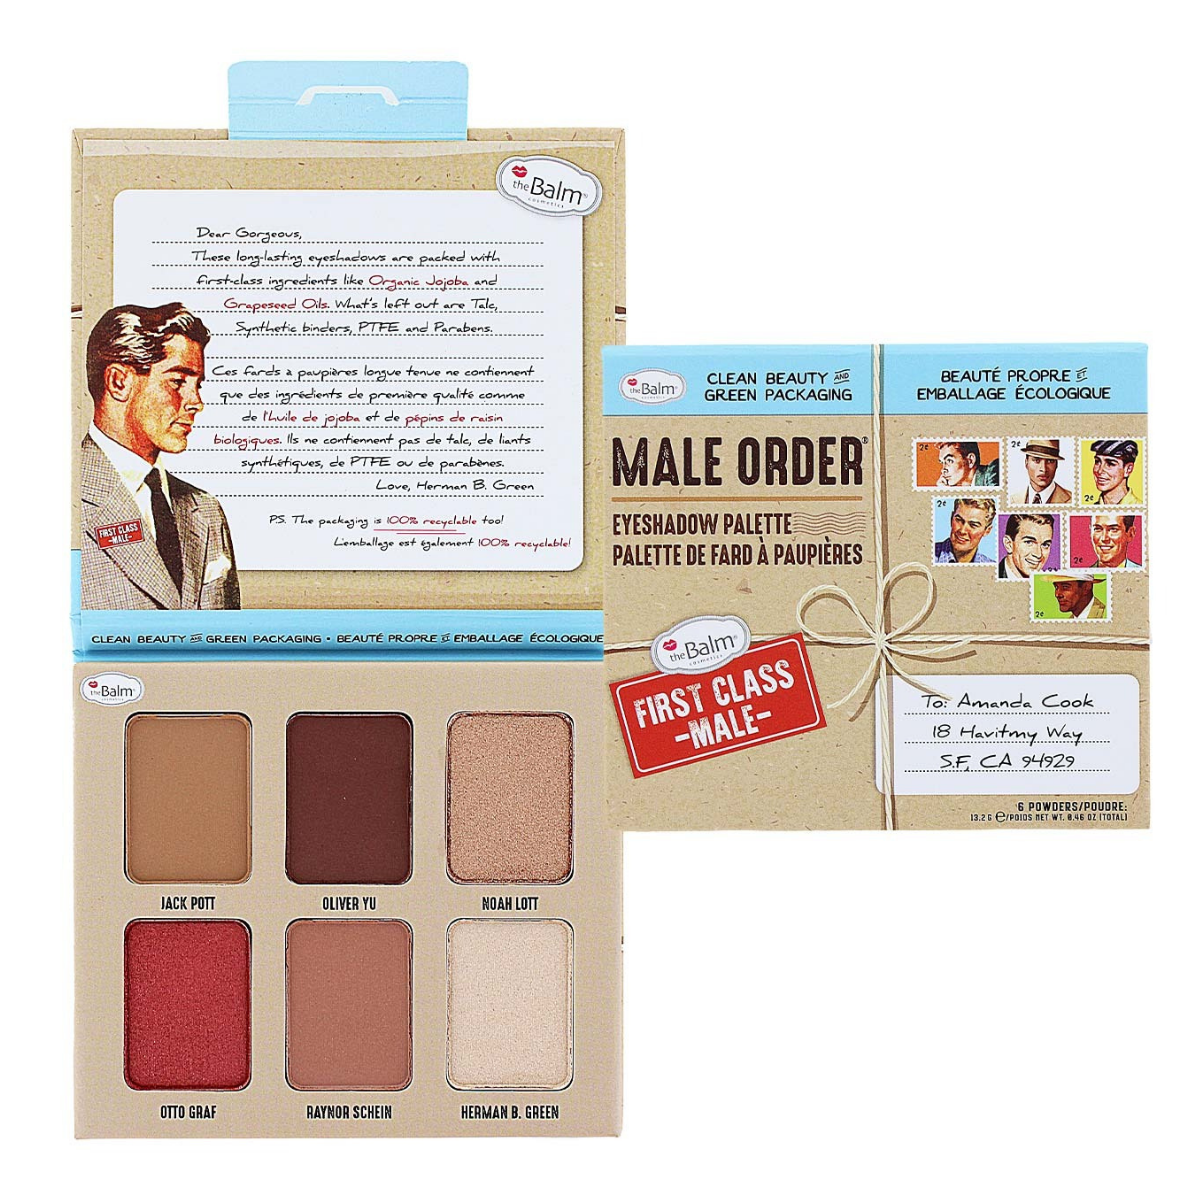 theBalm Male Order Palette - First Class Male. 30% off